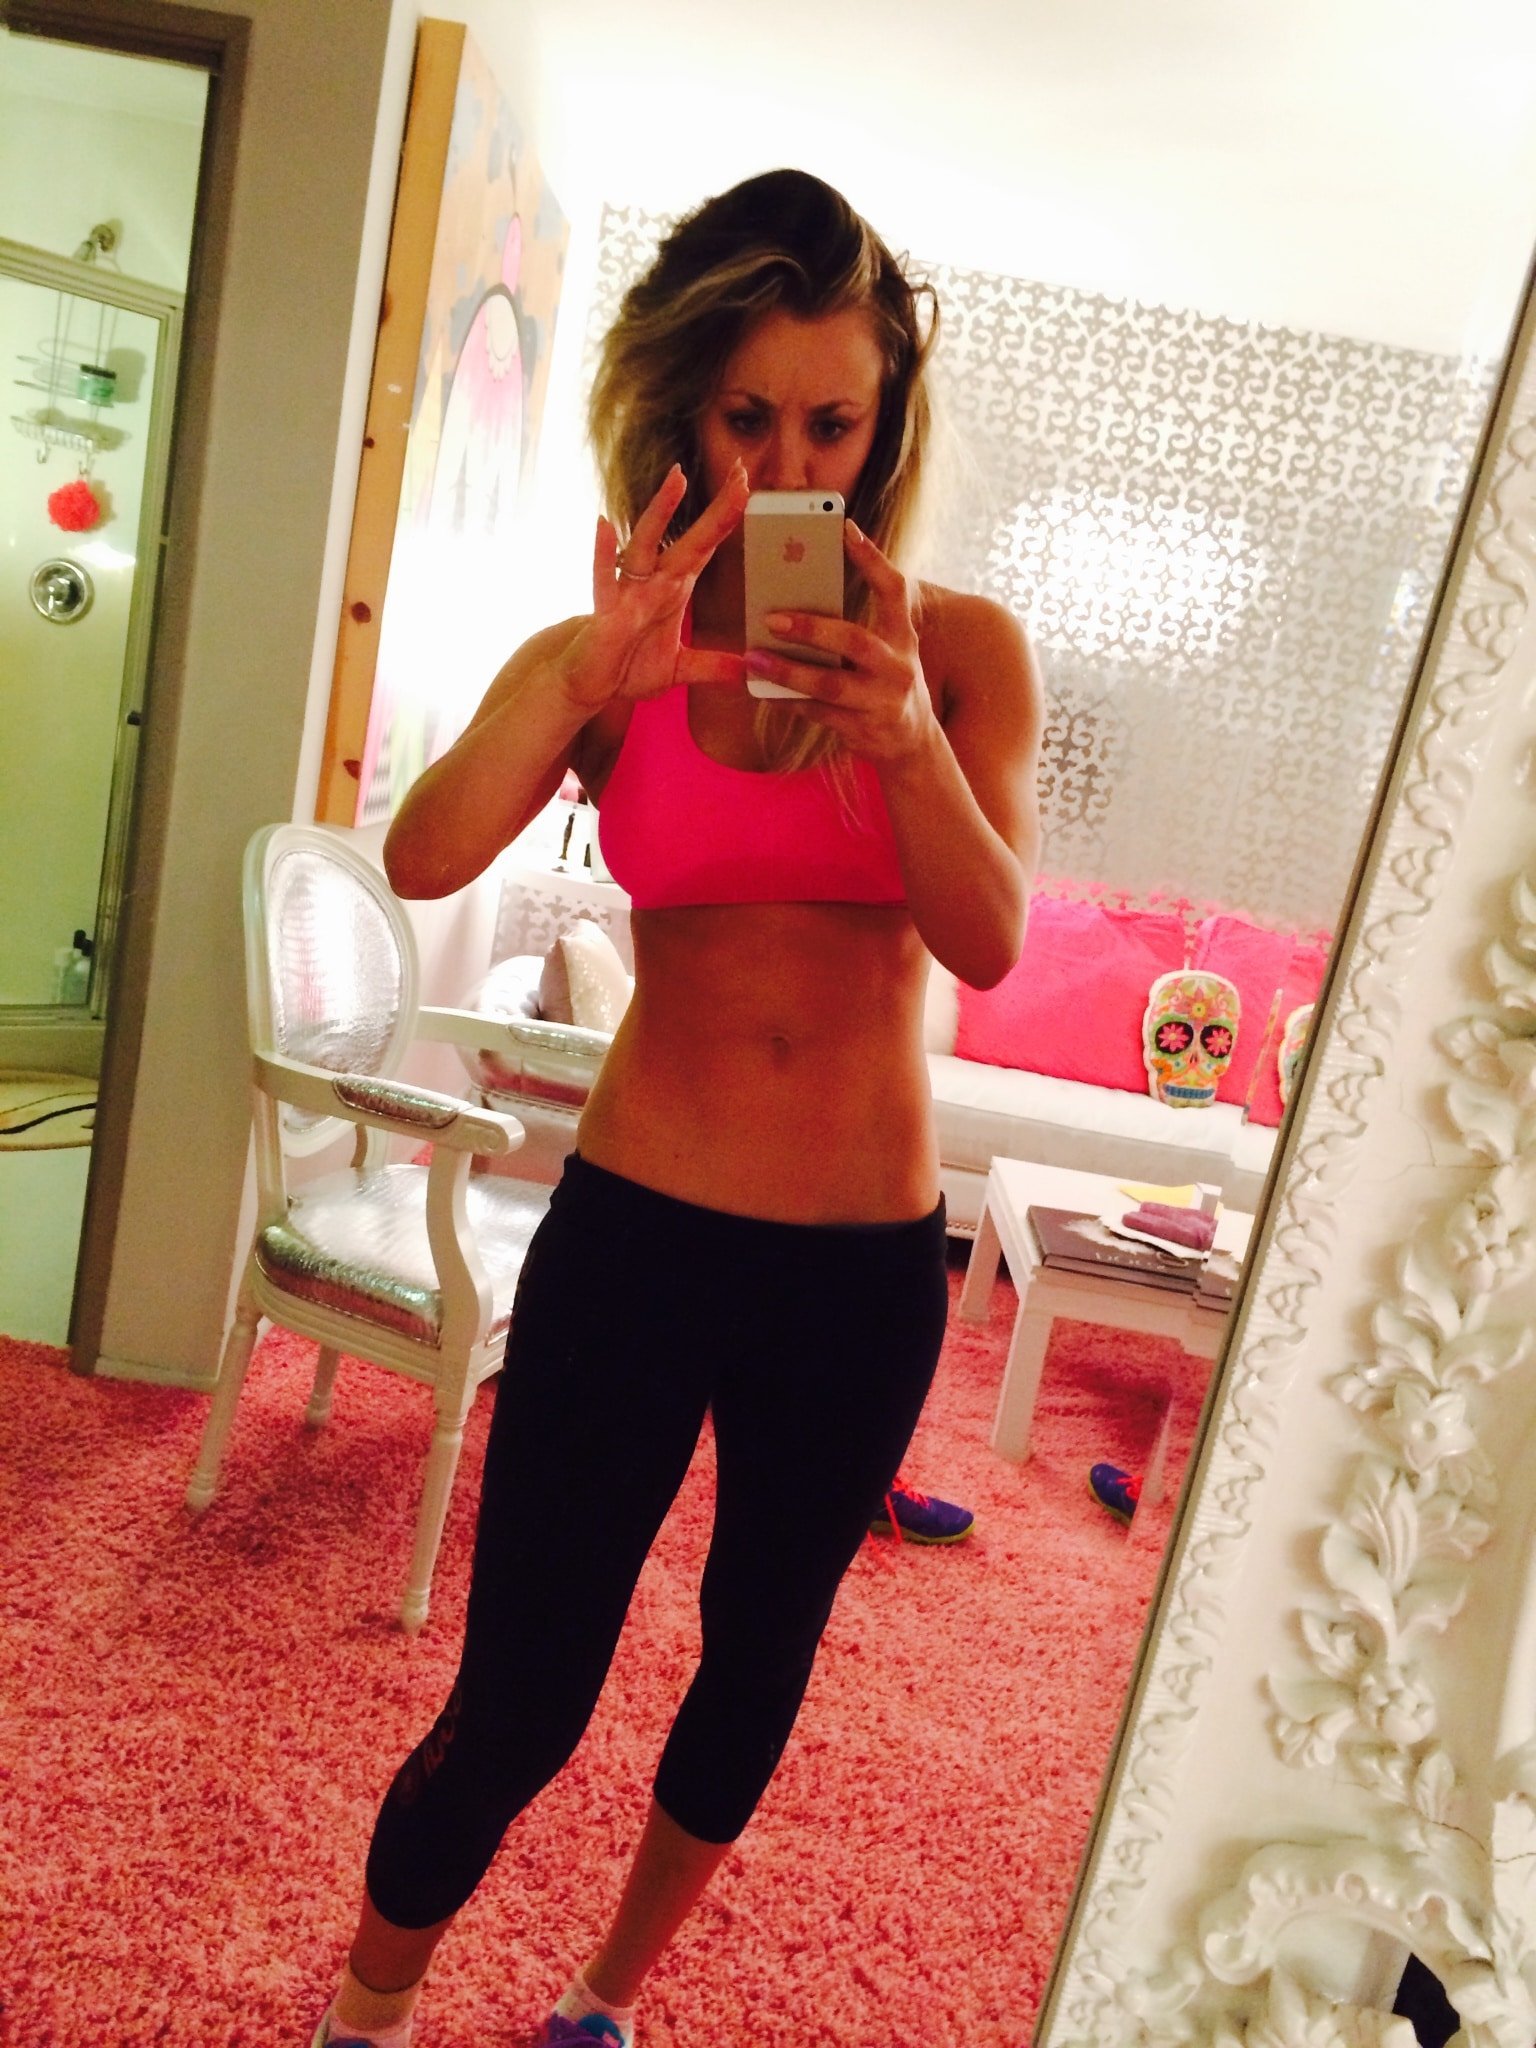 private photo of kaley cuoco taking a mirror pic in bright pink sports bra